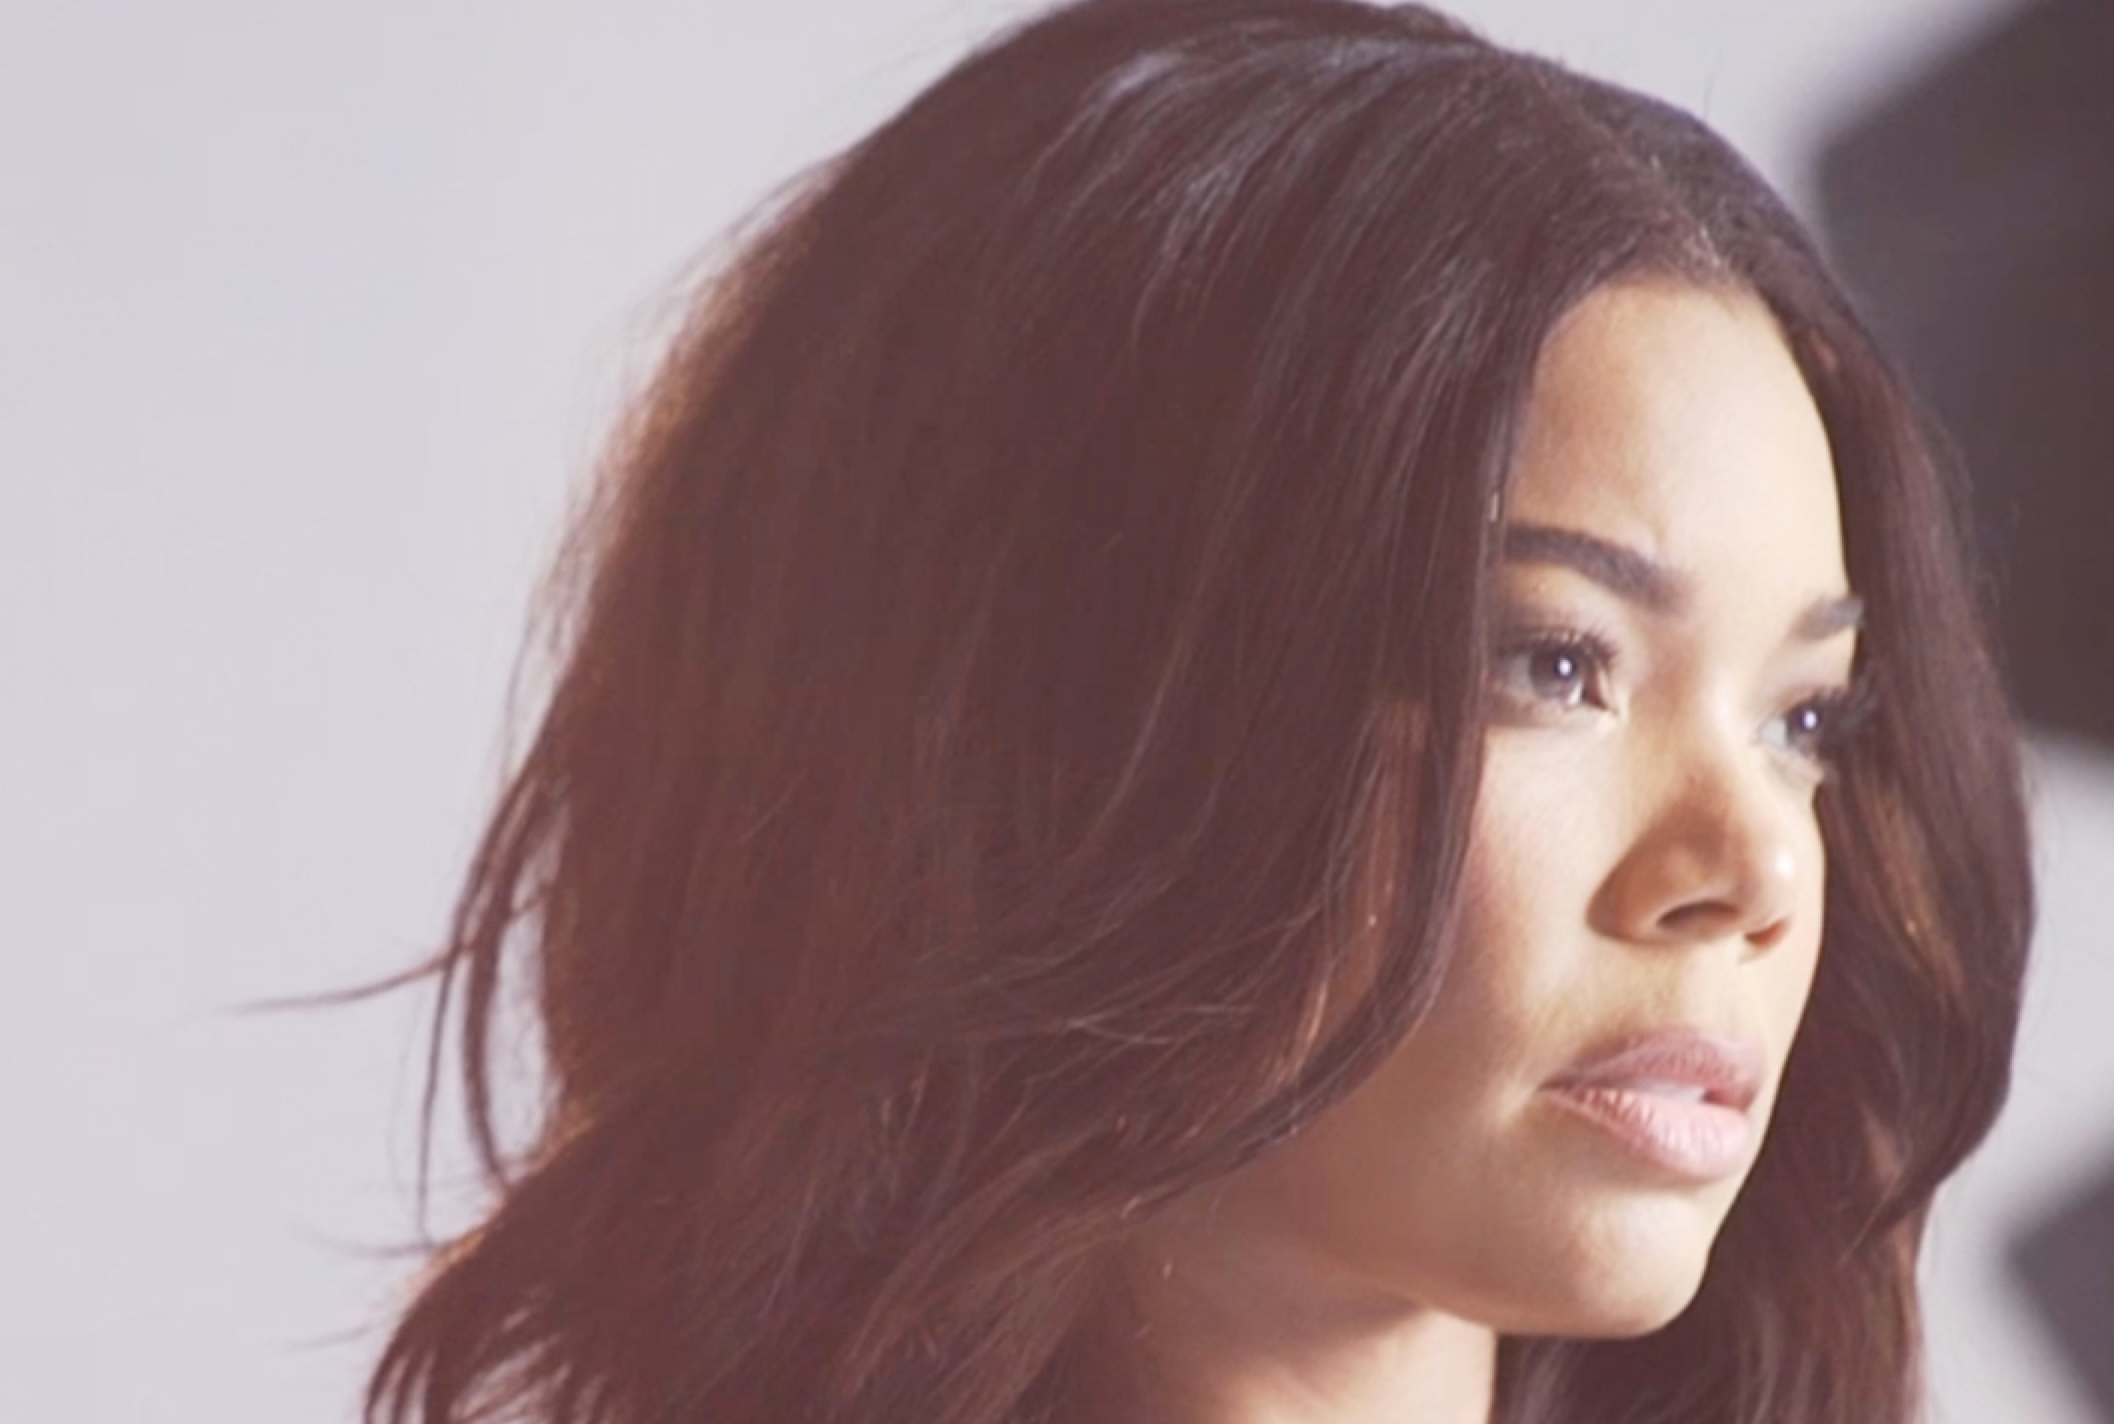 WATCH: Behind-The-Scenes At Gabrielle Union November Cover Shoot
